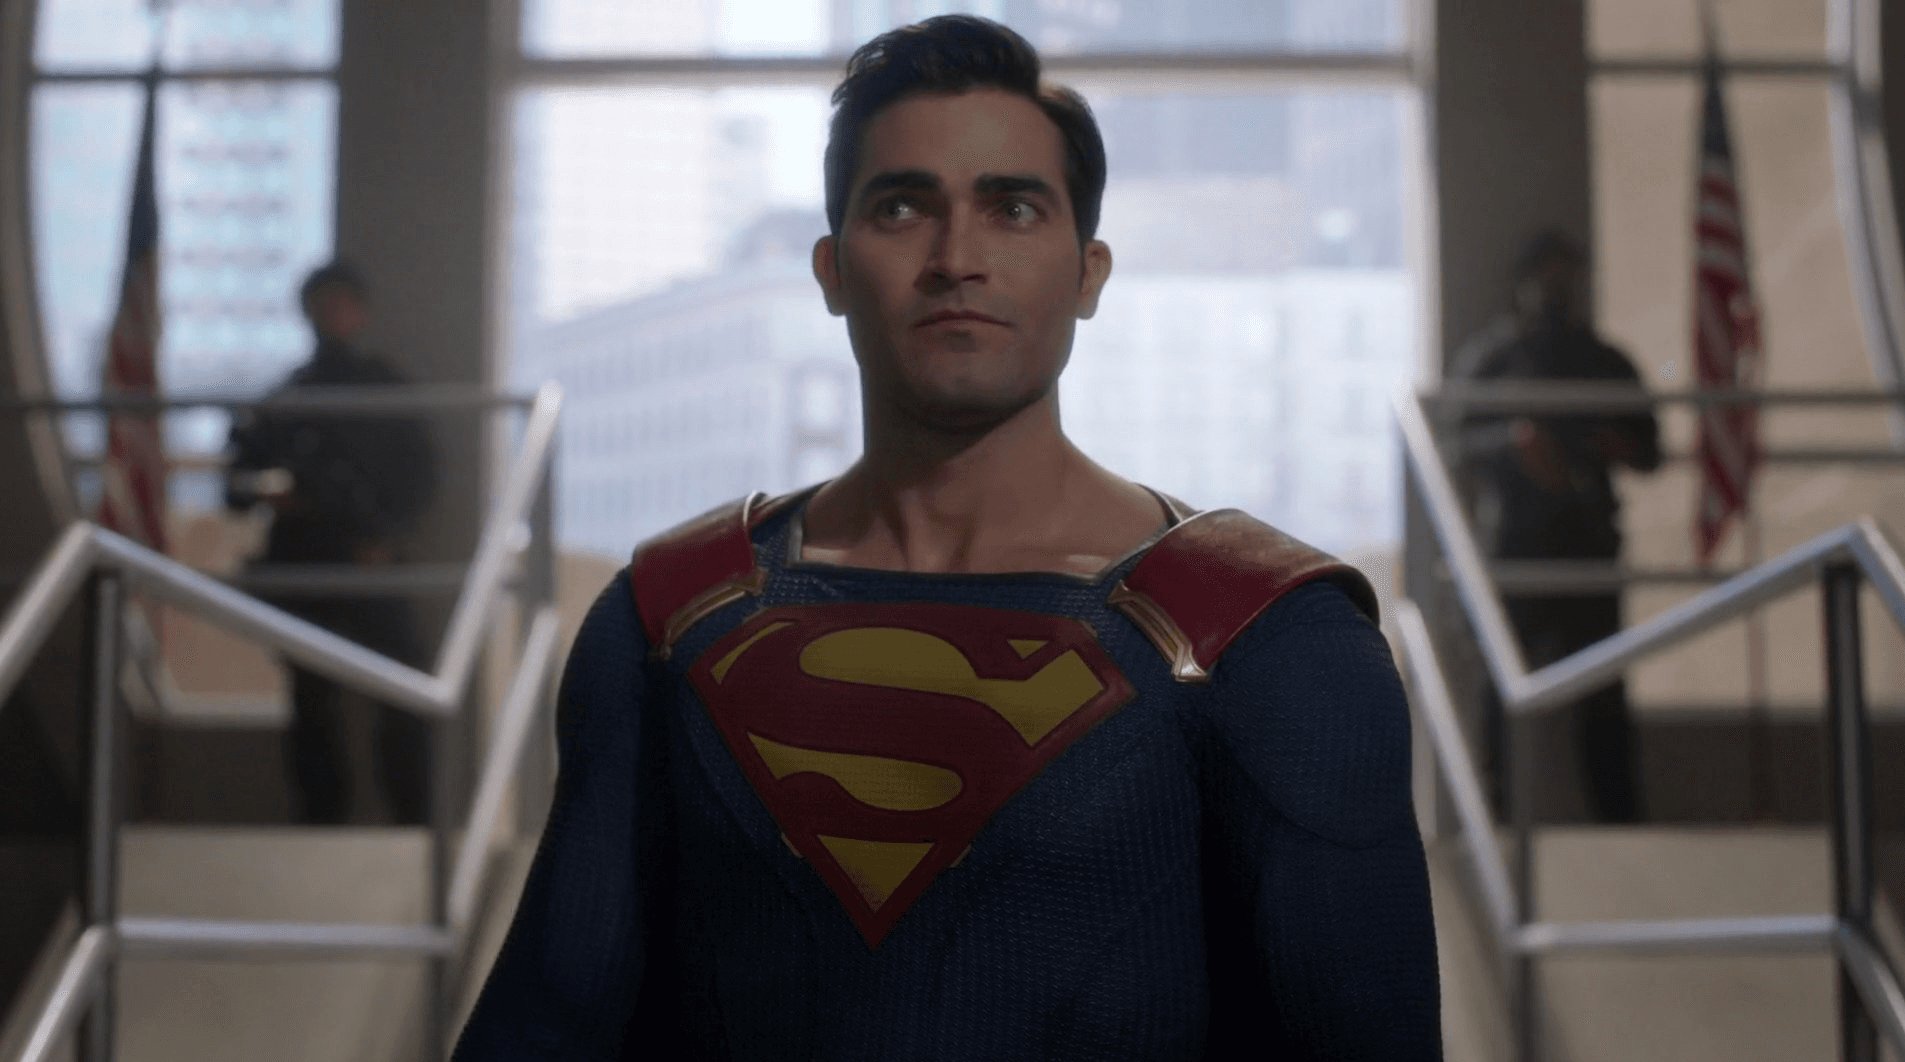 Random Fan Theories About Supergirl